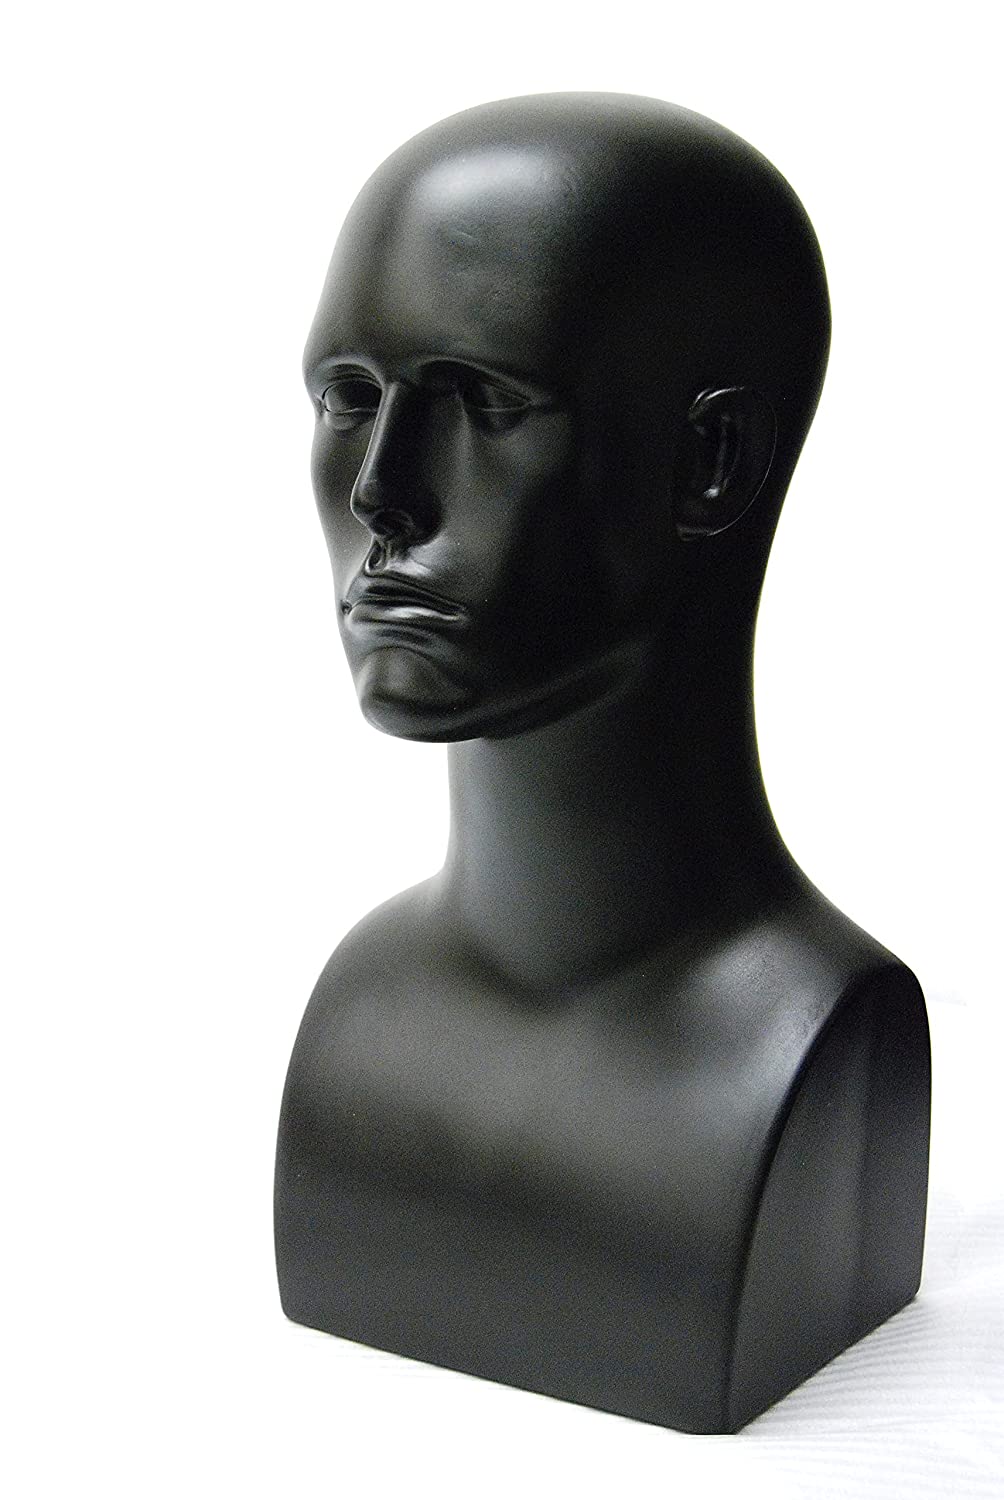 4 White Male Styrofoam Mannequin Head with Long Neck MM-256